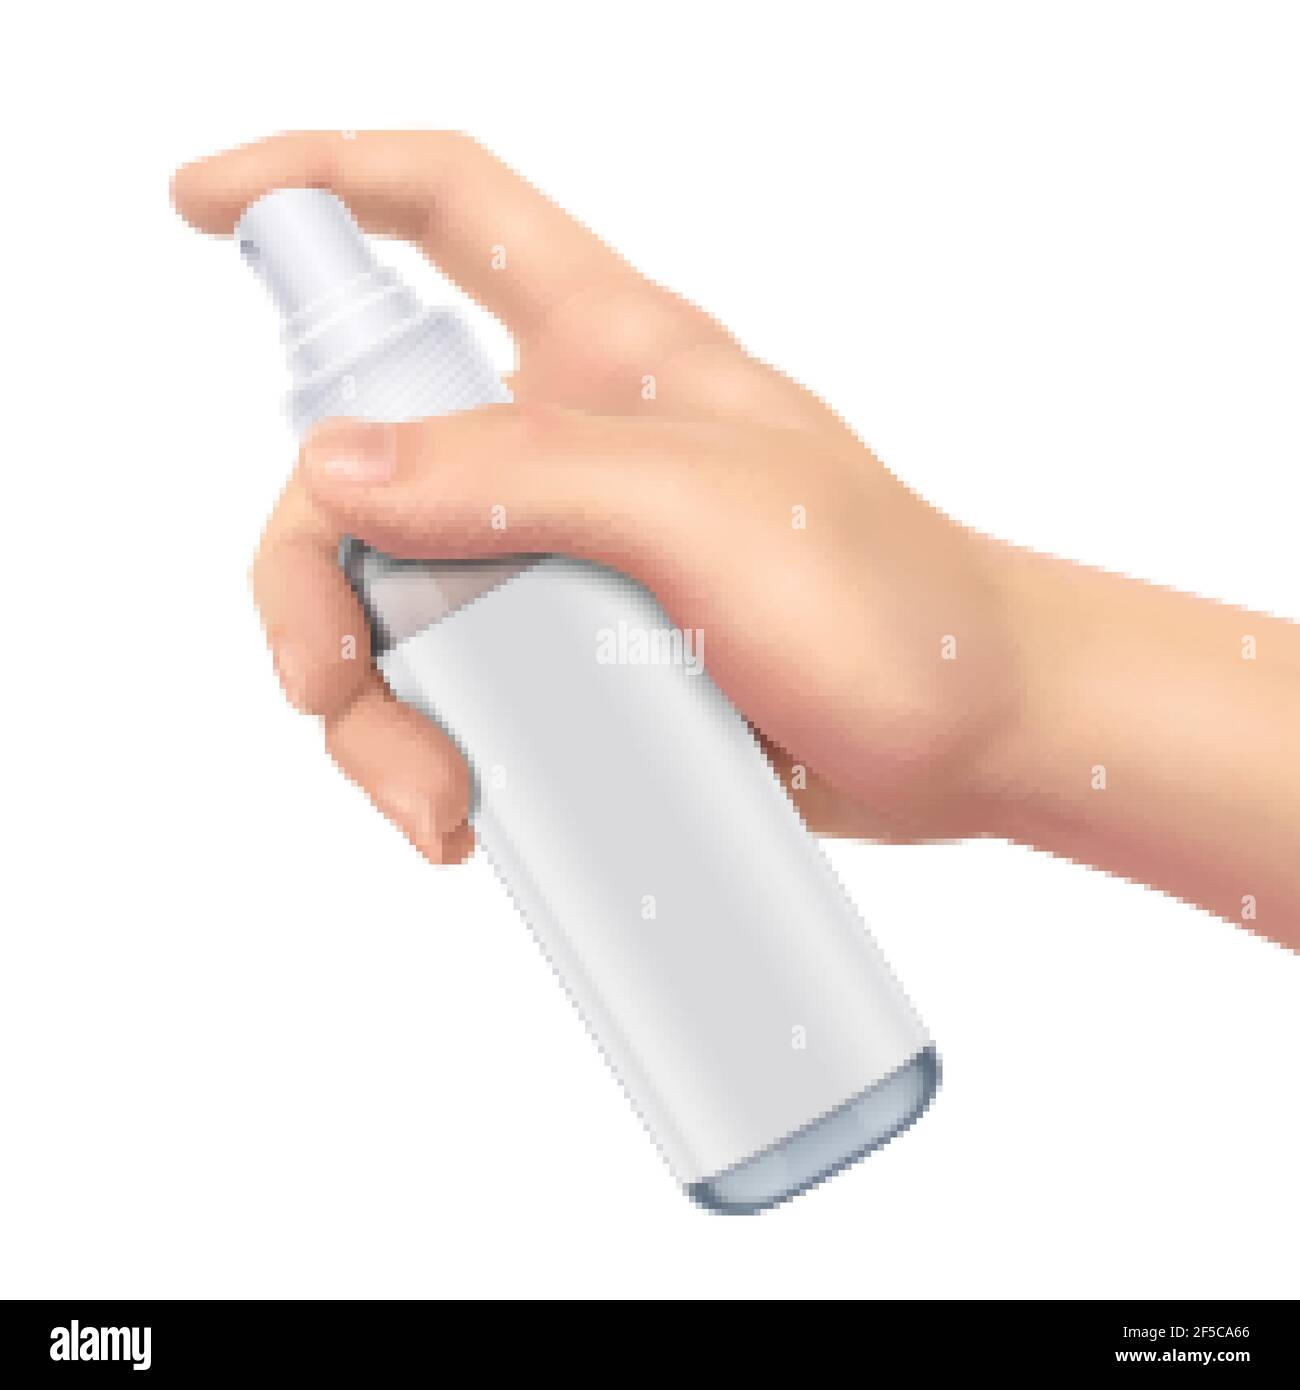 3d illustration of realistic hand holding white plastic spray bottle isolated on white background Stock Vector